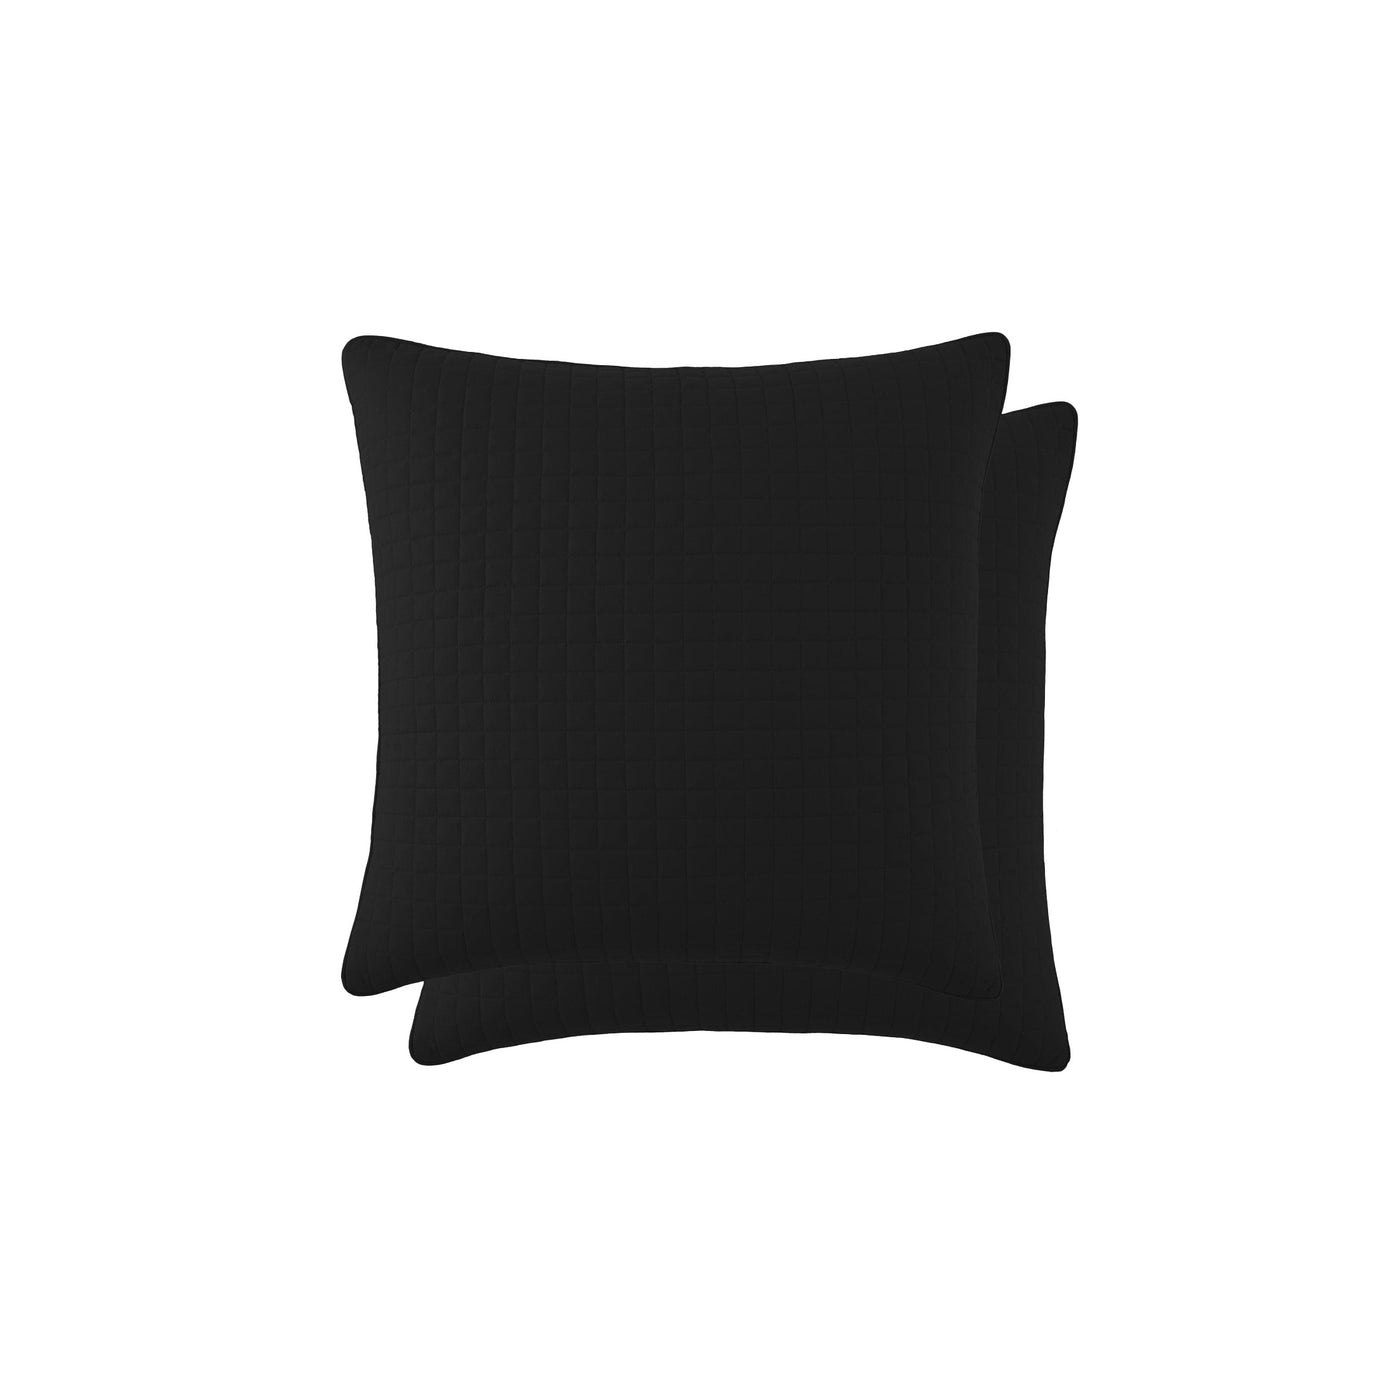 Top View of Vilano Quilted Sham and Pillow Covers in Black#color_vilano-black